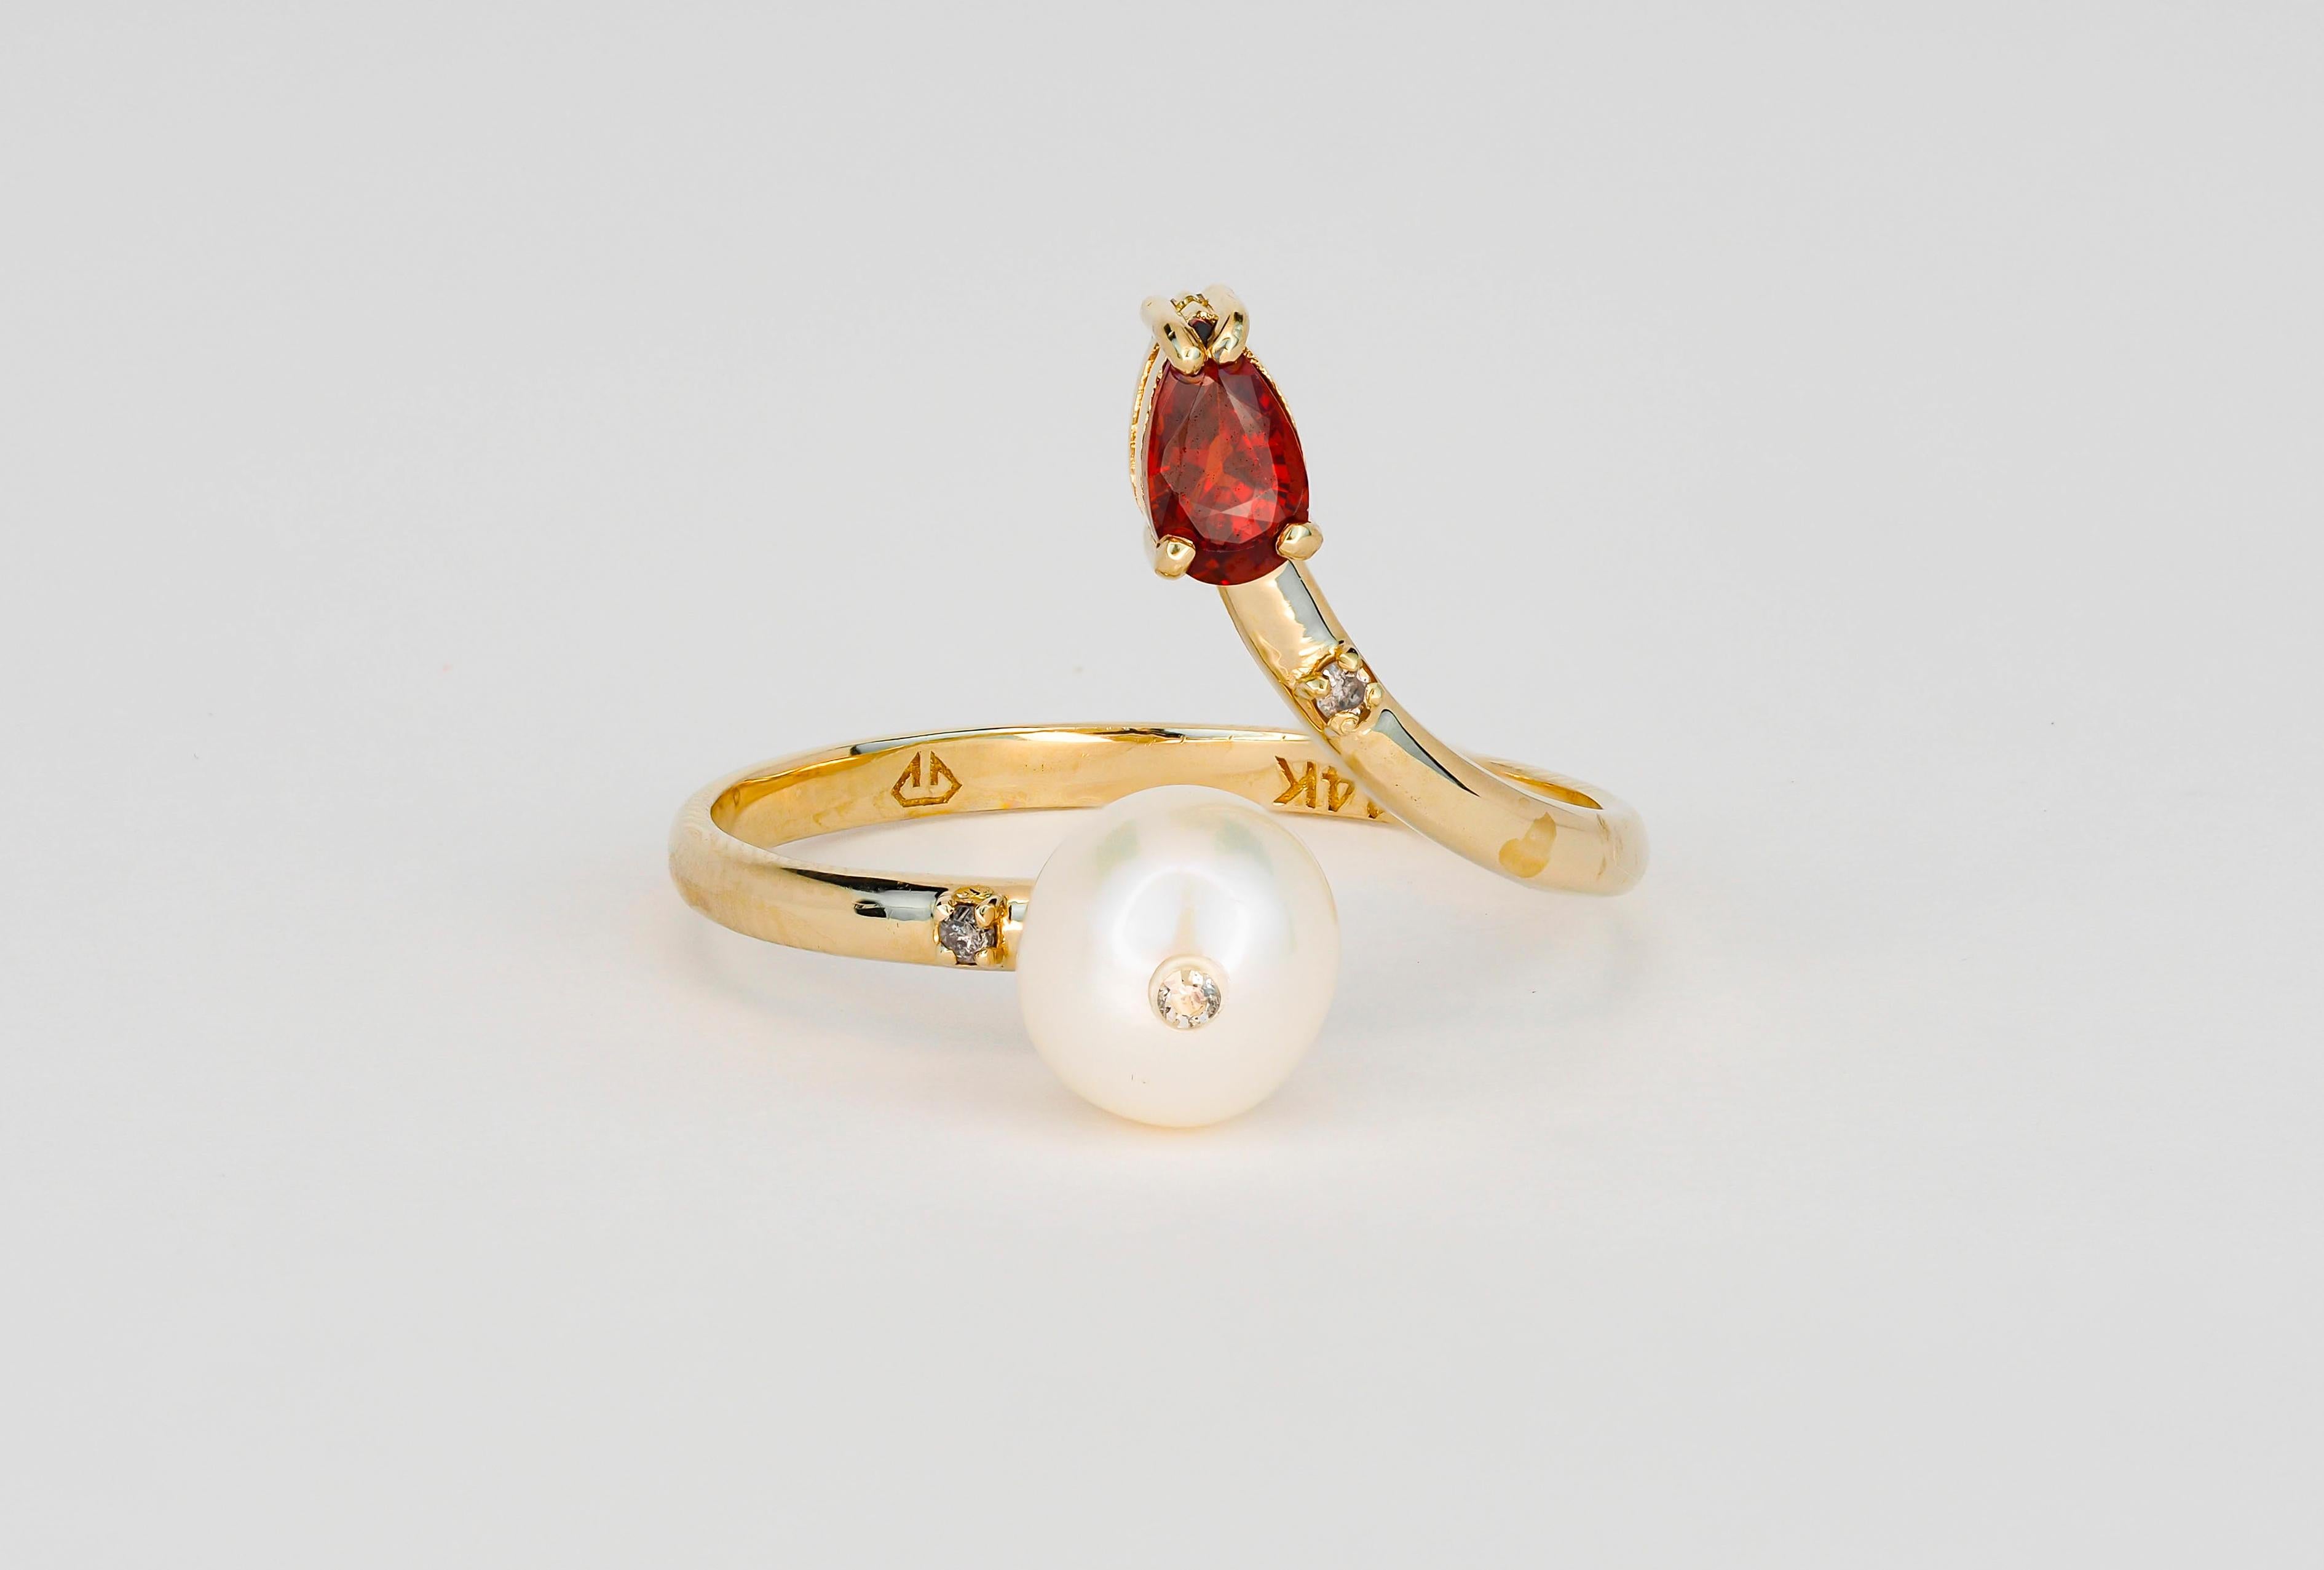 Pearl, garnet 14k gold ring. 
Open ended garnet ring. Adjustable gold ring. Pear garnet ring. January and June birthstone ring.

Metal: 14k gold
Weight: 1.70 g. depnds from size.

Main stone - culturel Akoya Pearl
White color, round cut, 6.2 mm